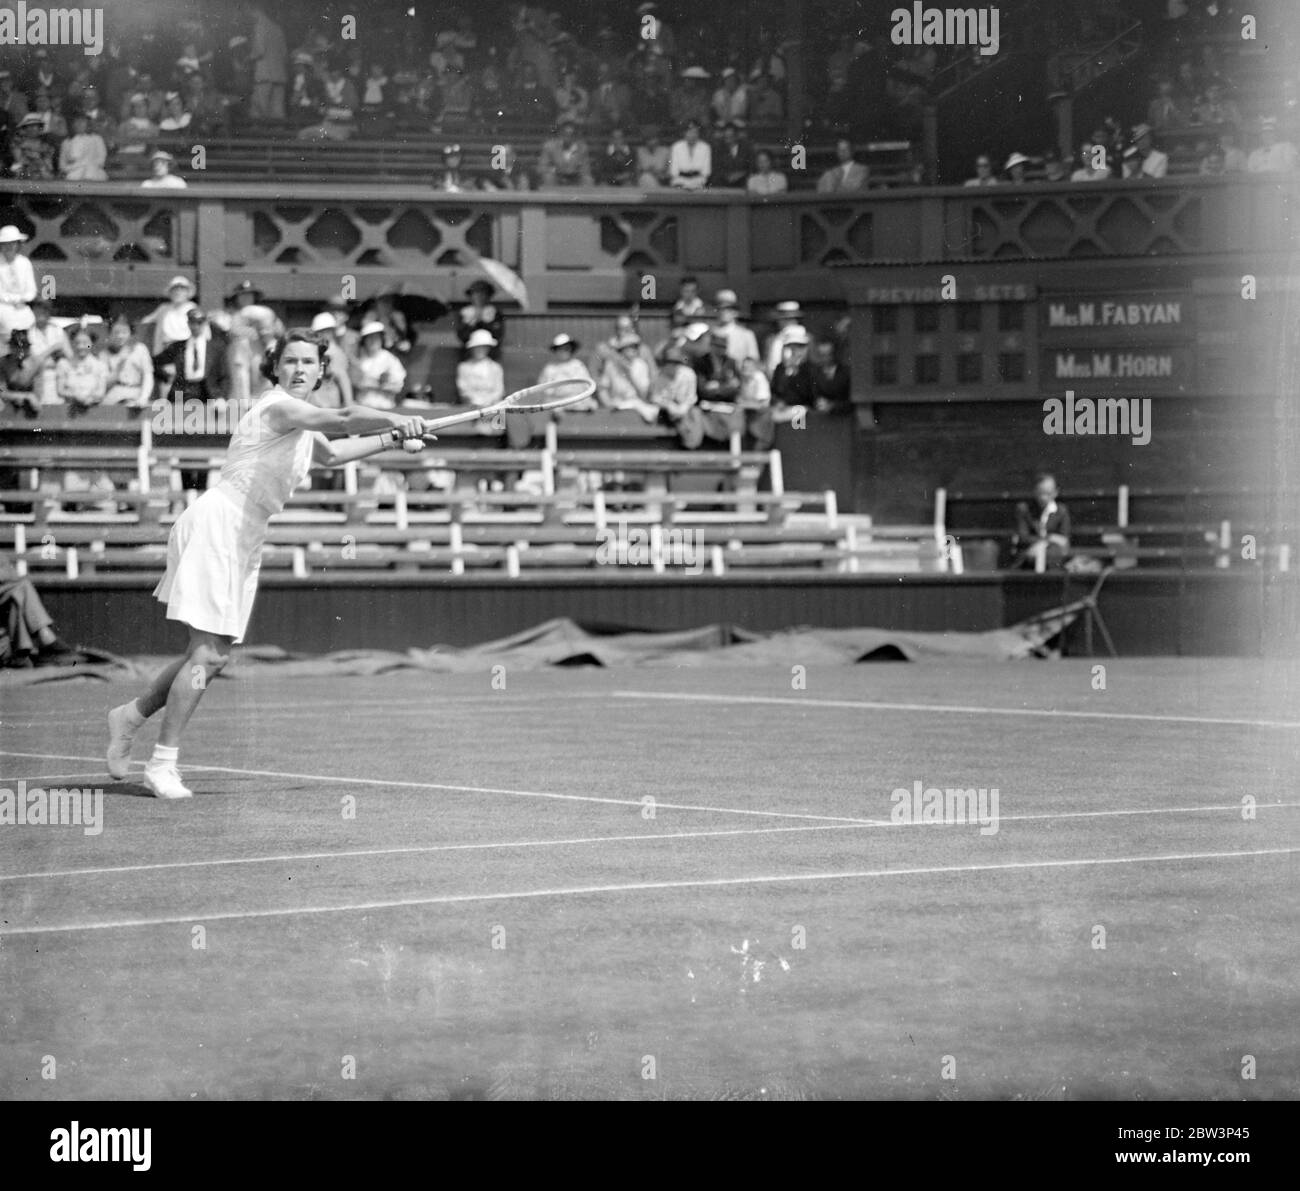 Mrs. Fabyan Meets Fraulein Horn In Women ' s Singles At Wimbledon . This was women ' s day at Wimbledon a number of players of international repute making their appearance in the championship . Photo Shows : Mrs . M . Fabyan ( USA ) in play against Fraulein M . Horn ( Germany ) on the centre court in the first round of the women ' s singles . 23 Jun 1936 Stock Photo